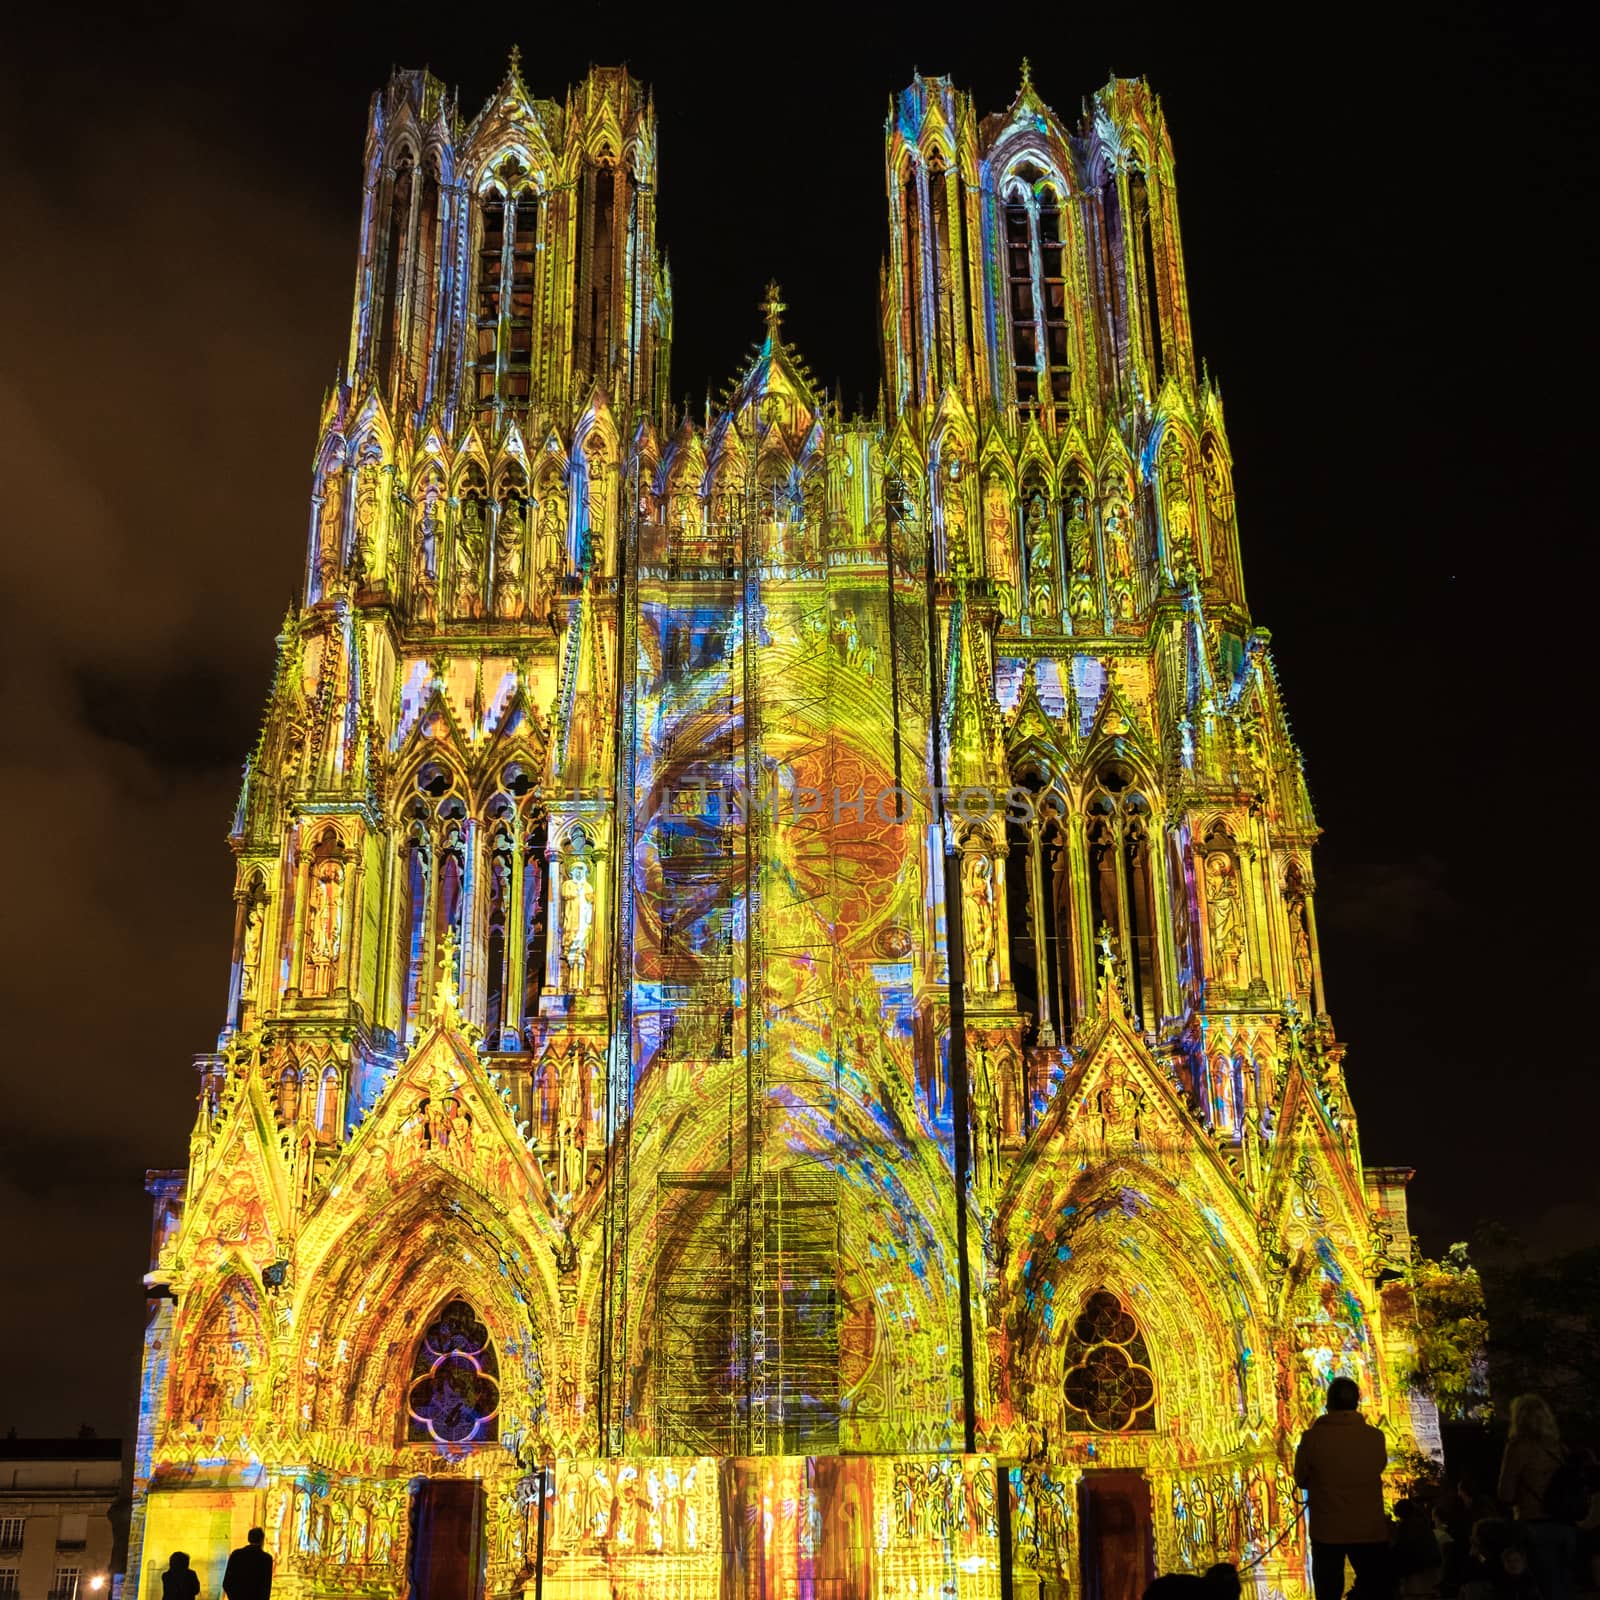 Light Show at Reims Cathedral by phil_bird